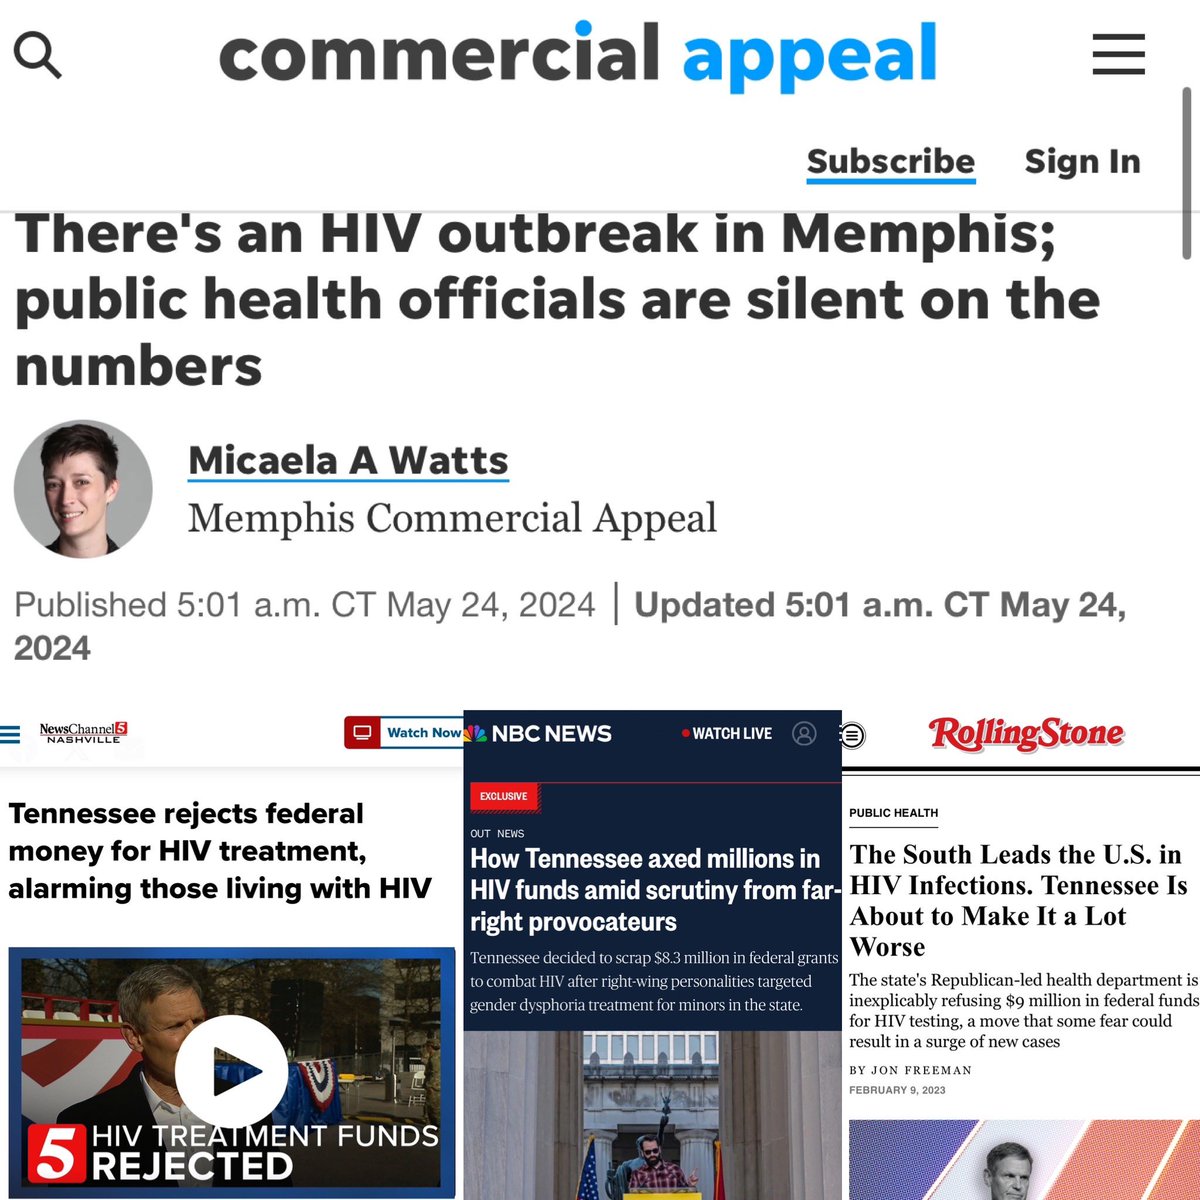 😳⚡️UPDATE: The HIV outbreak @GovBillLee was warned about when he rejected federal HIV funding to pander to right-wing extremists has now occurred in Memphis. Lee says “It matters who leads.” — it sure does. commercialappeal.com/story/news/loc…